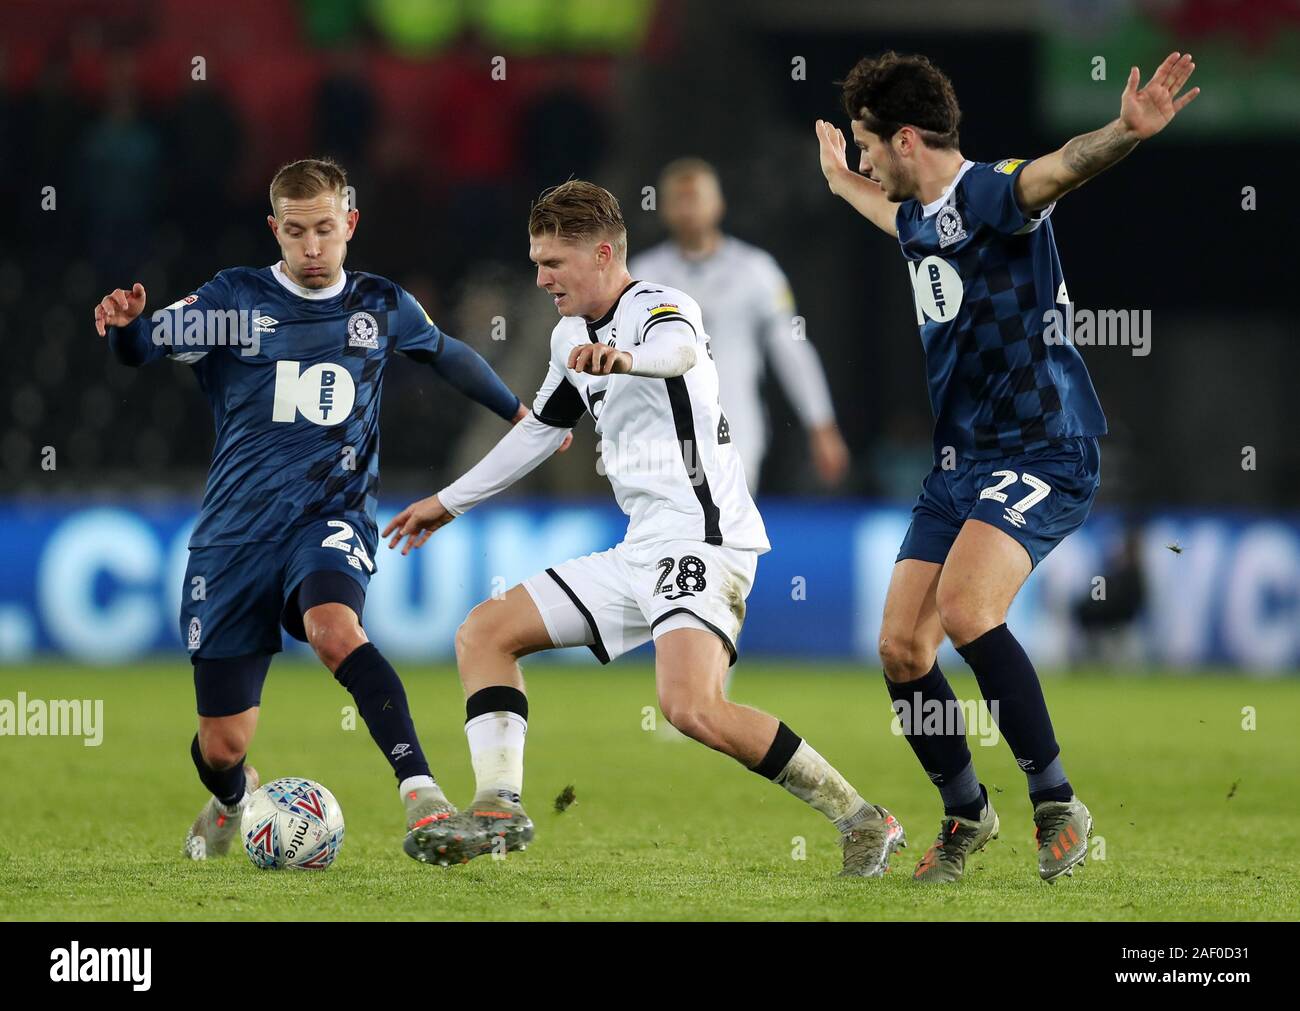 Blackburn Rovers' Lewis Travis competing with Millwall's George News  Photo - Getty Images